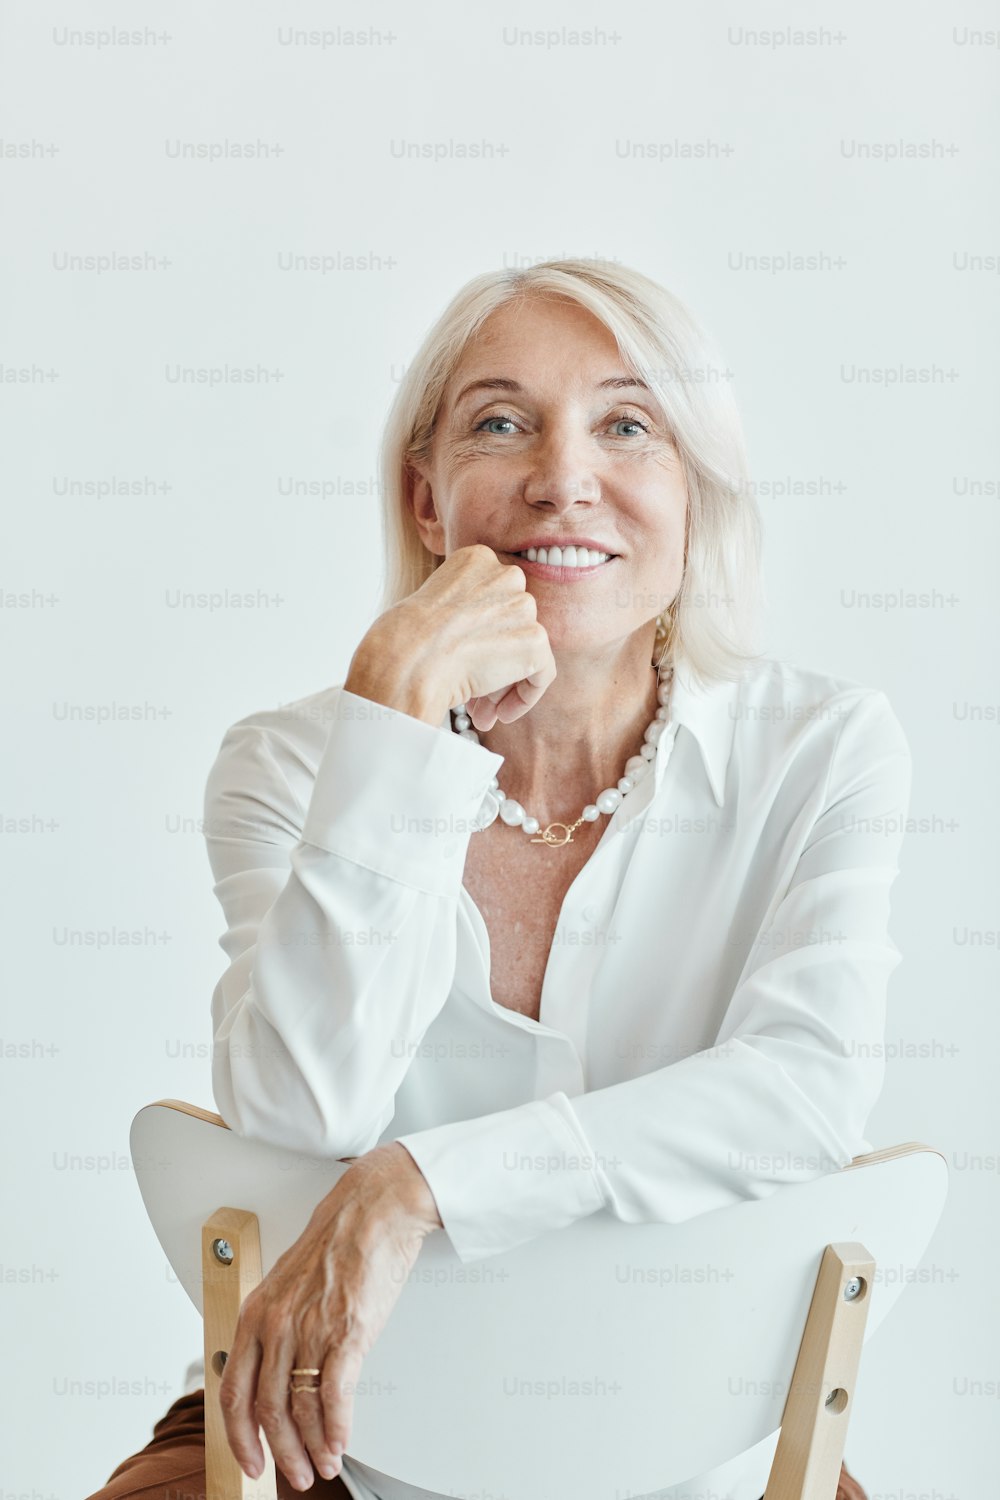 Vertical portrait of elegant mature woman smiling while sitting on chair backwards against white background